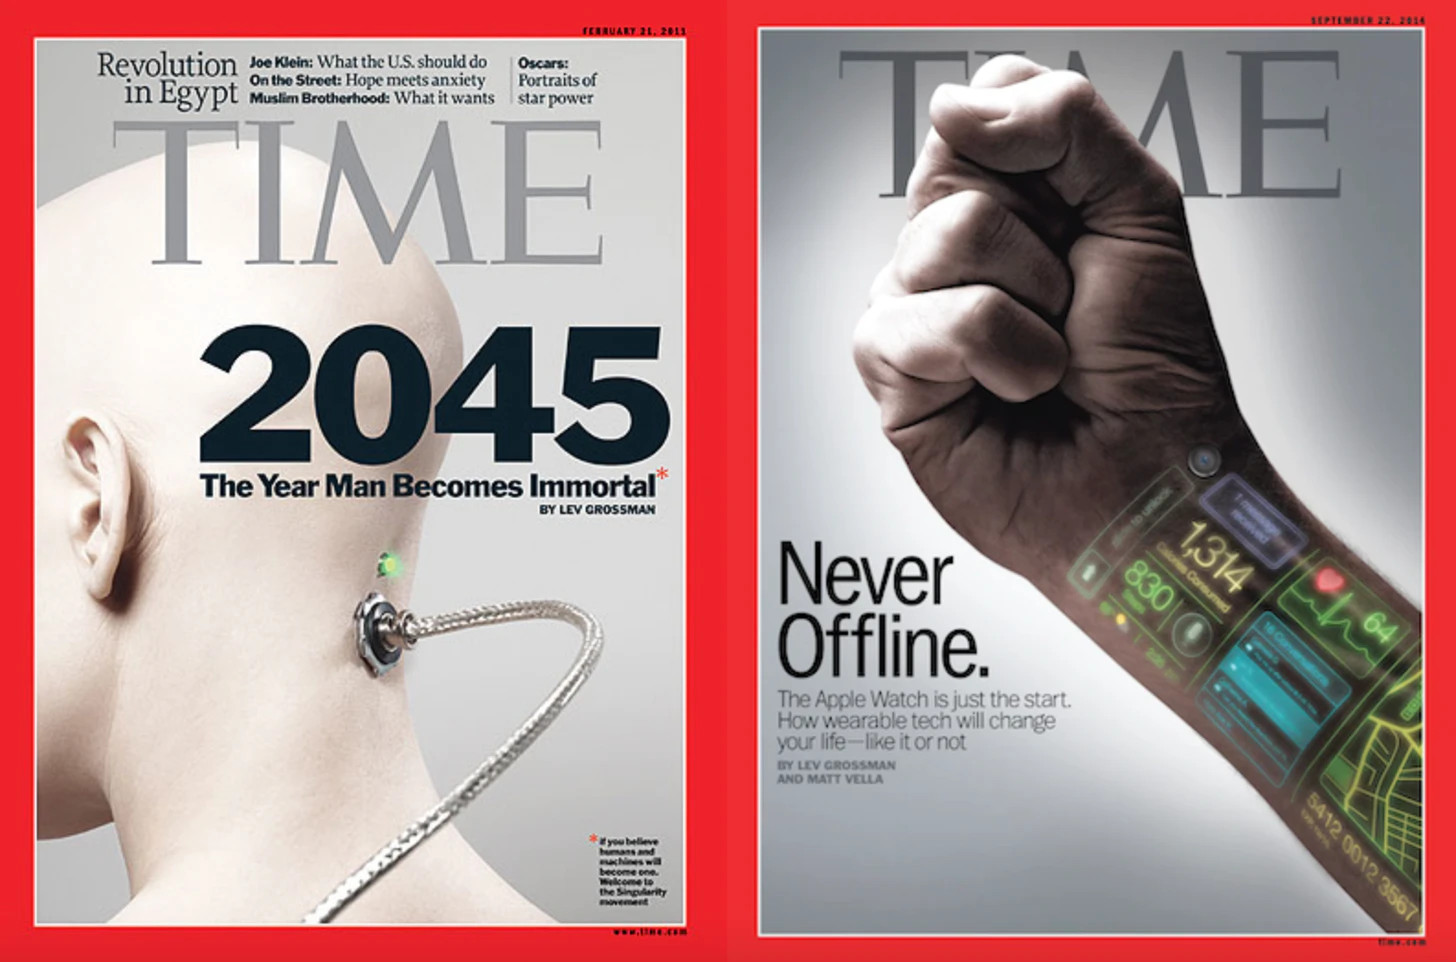 Mark of the beast shown on covers of Time magazine.